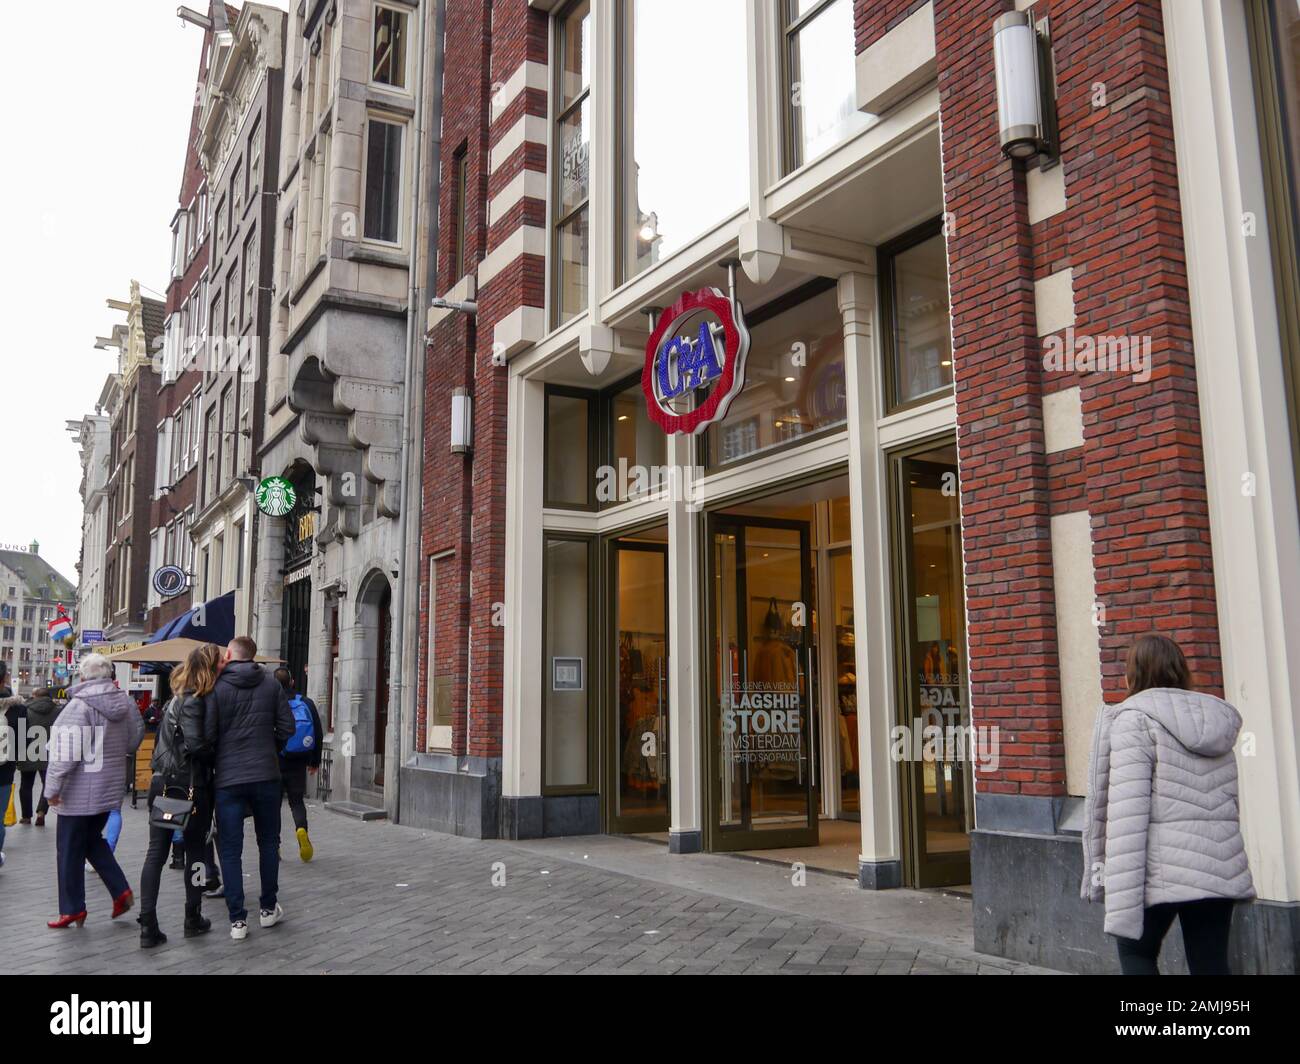 A C & A store in Amsterdam, The Netherlands Stock Photo